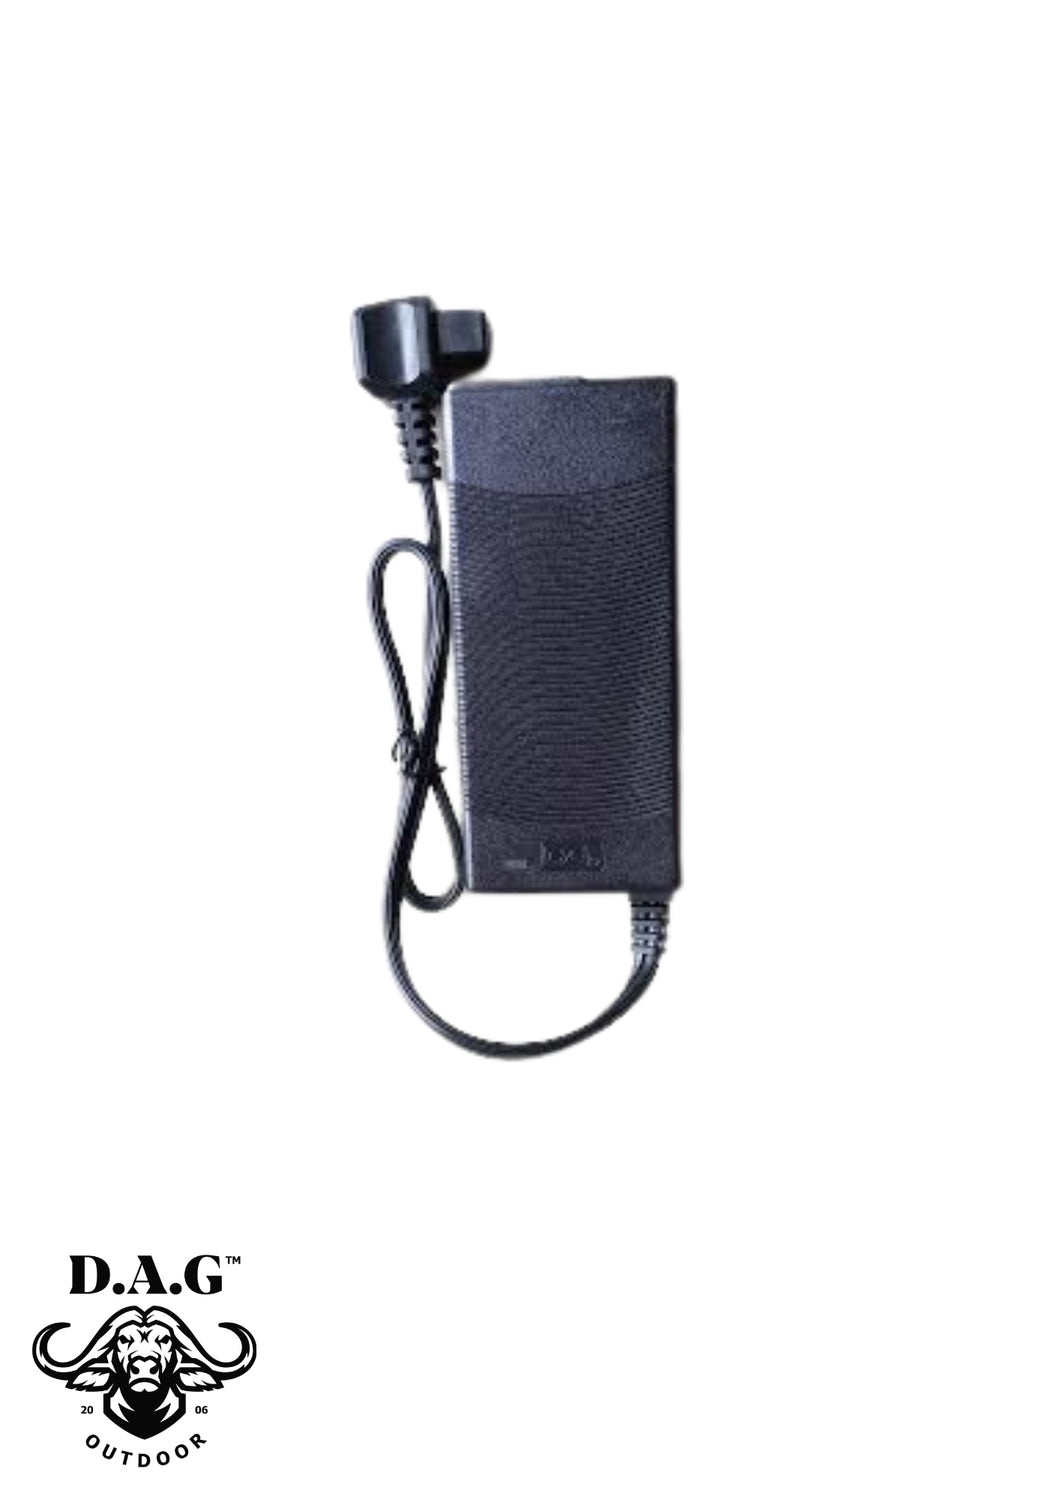 D.A.G AC to DC Power Supply